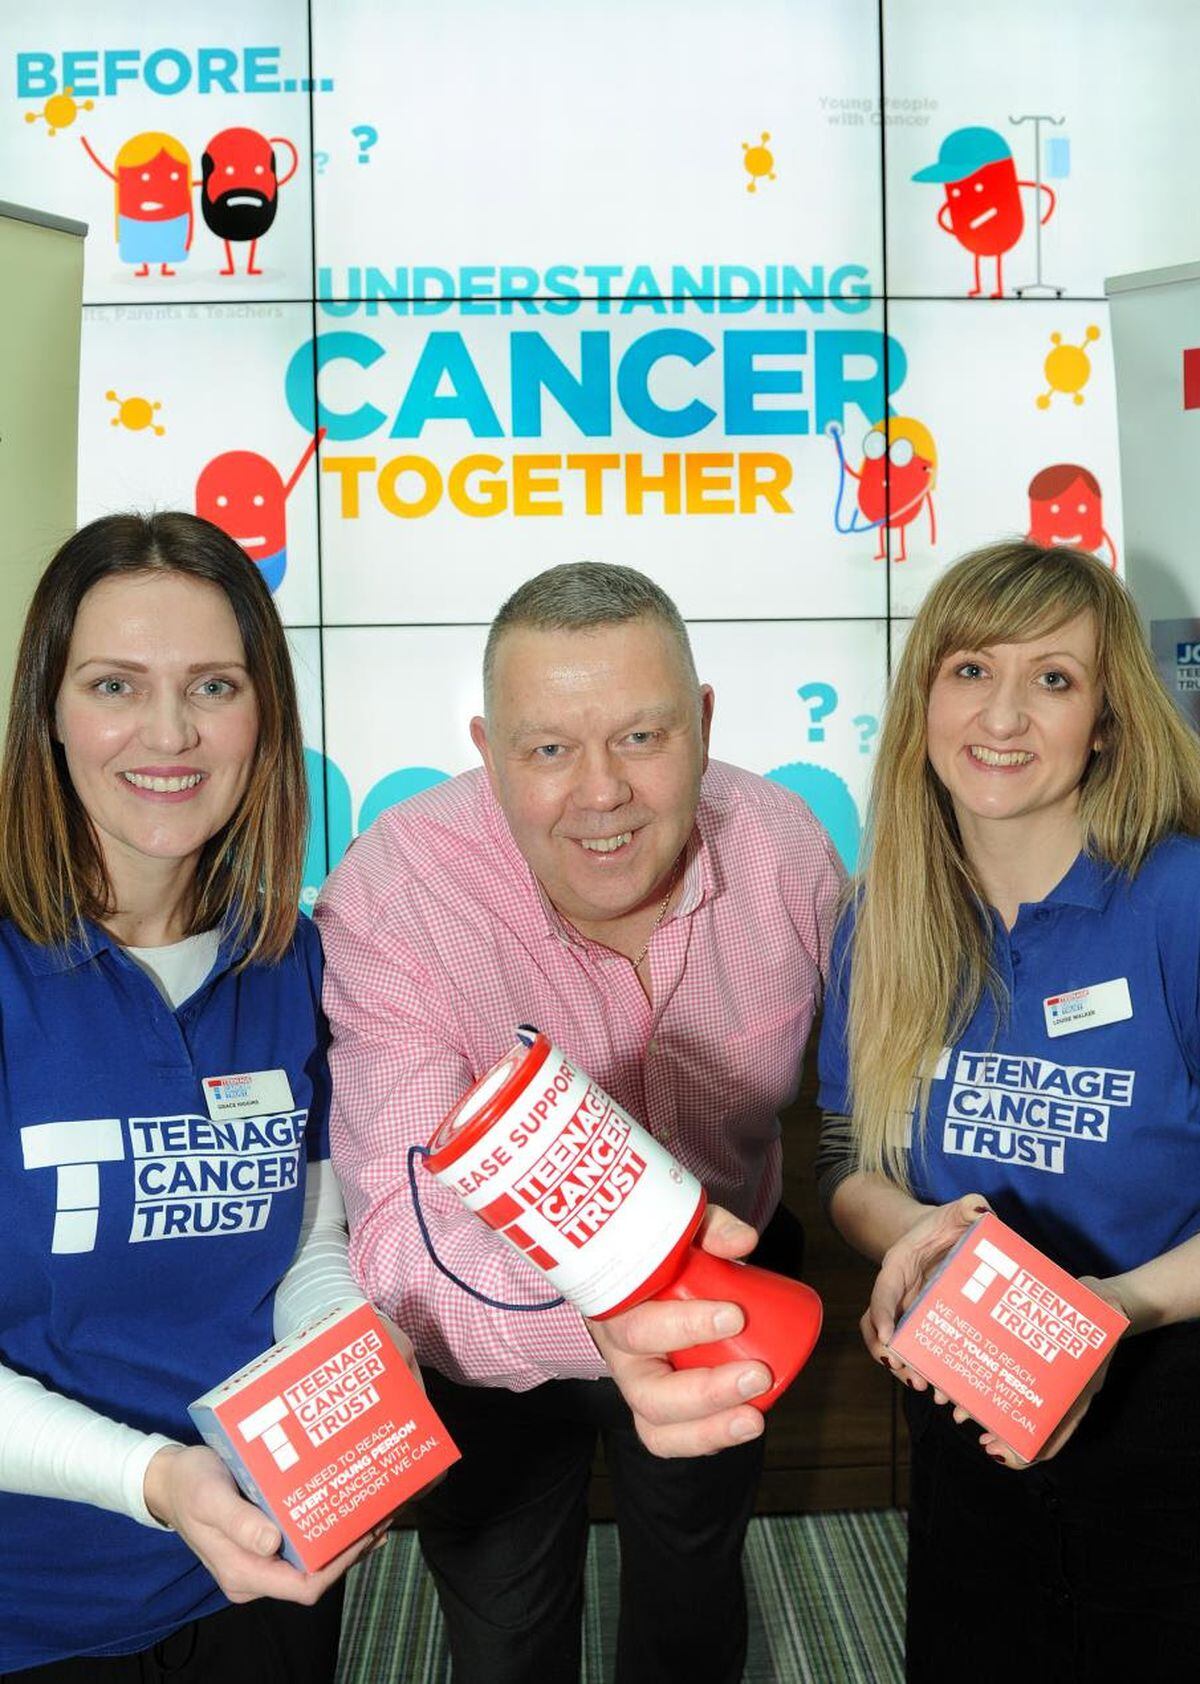 From left, Grace Higgins (Teenage Cancer Trust), Tim Jones (Higgs & Sons) and Louise Walker (Teenage Cancer Trust). Photo taken prior to Covid-19 social distancing